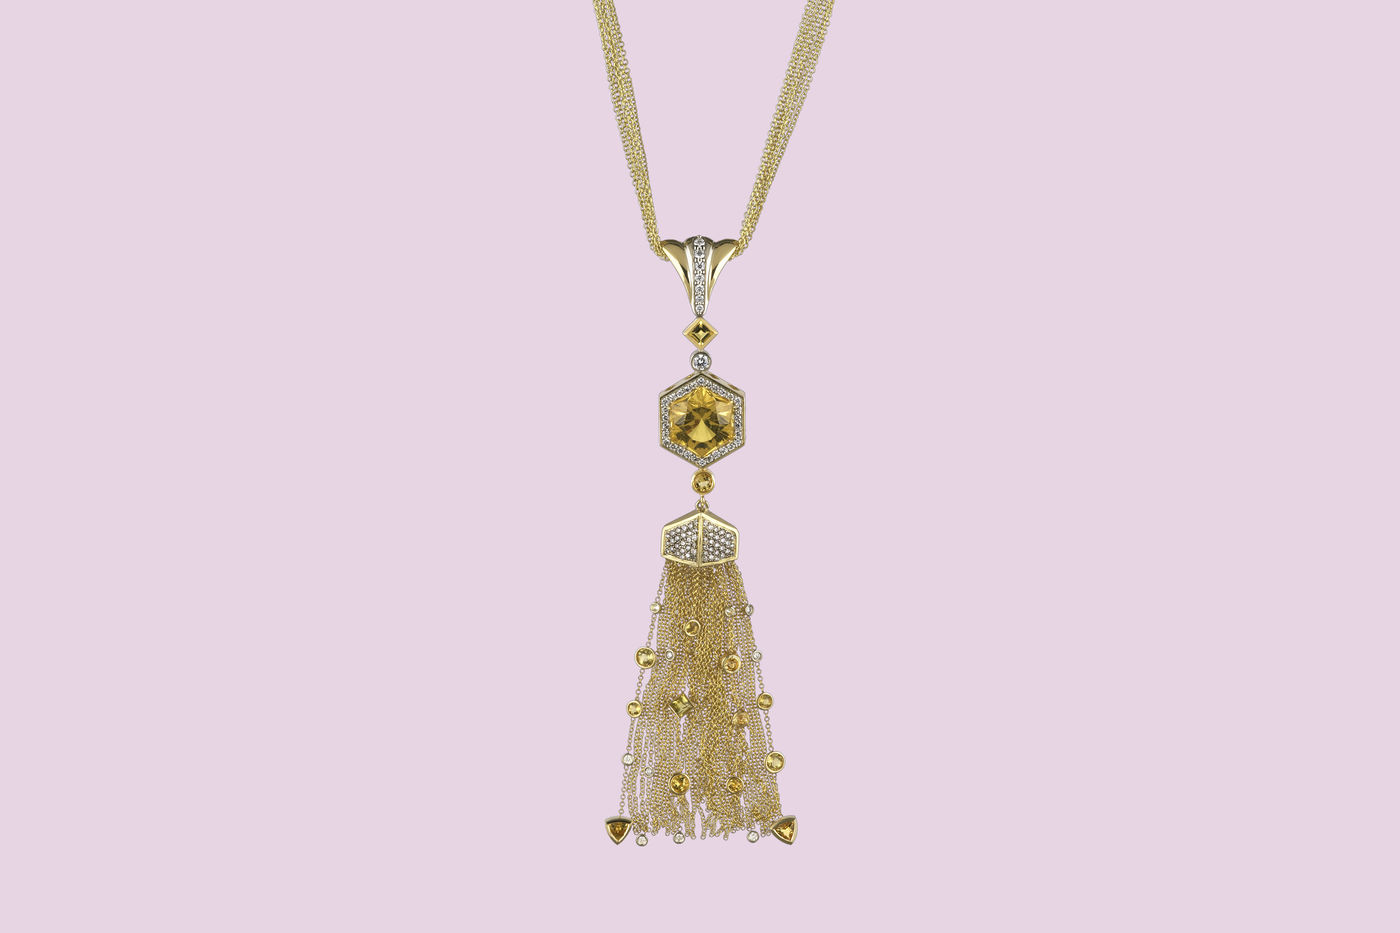 “Sunlit Diamonds and Fringe,” a heliodor pendant designed by Ellie Thompson of Ellie Thompson & Co., features an 8.3-carat centerpiece heliodor stone from Tajikistan. It is set in 18-karat yellow gold with 100 small diamonds and 14 smaller heliodors.